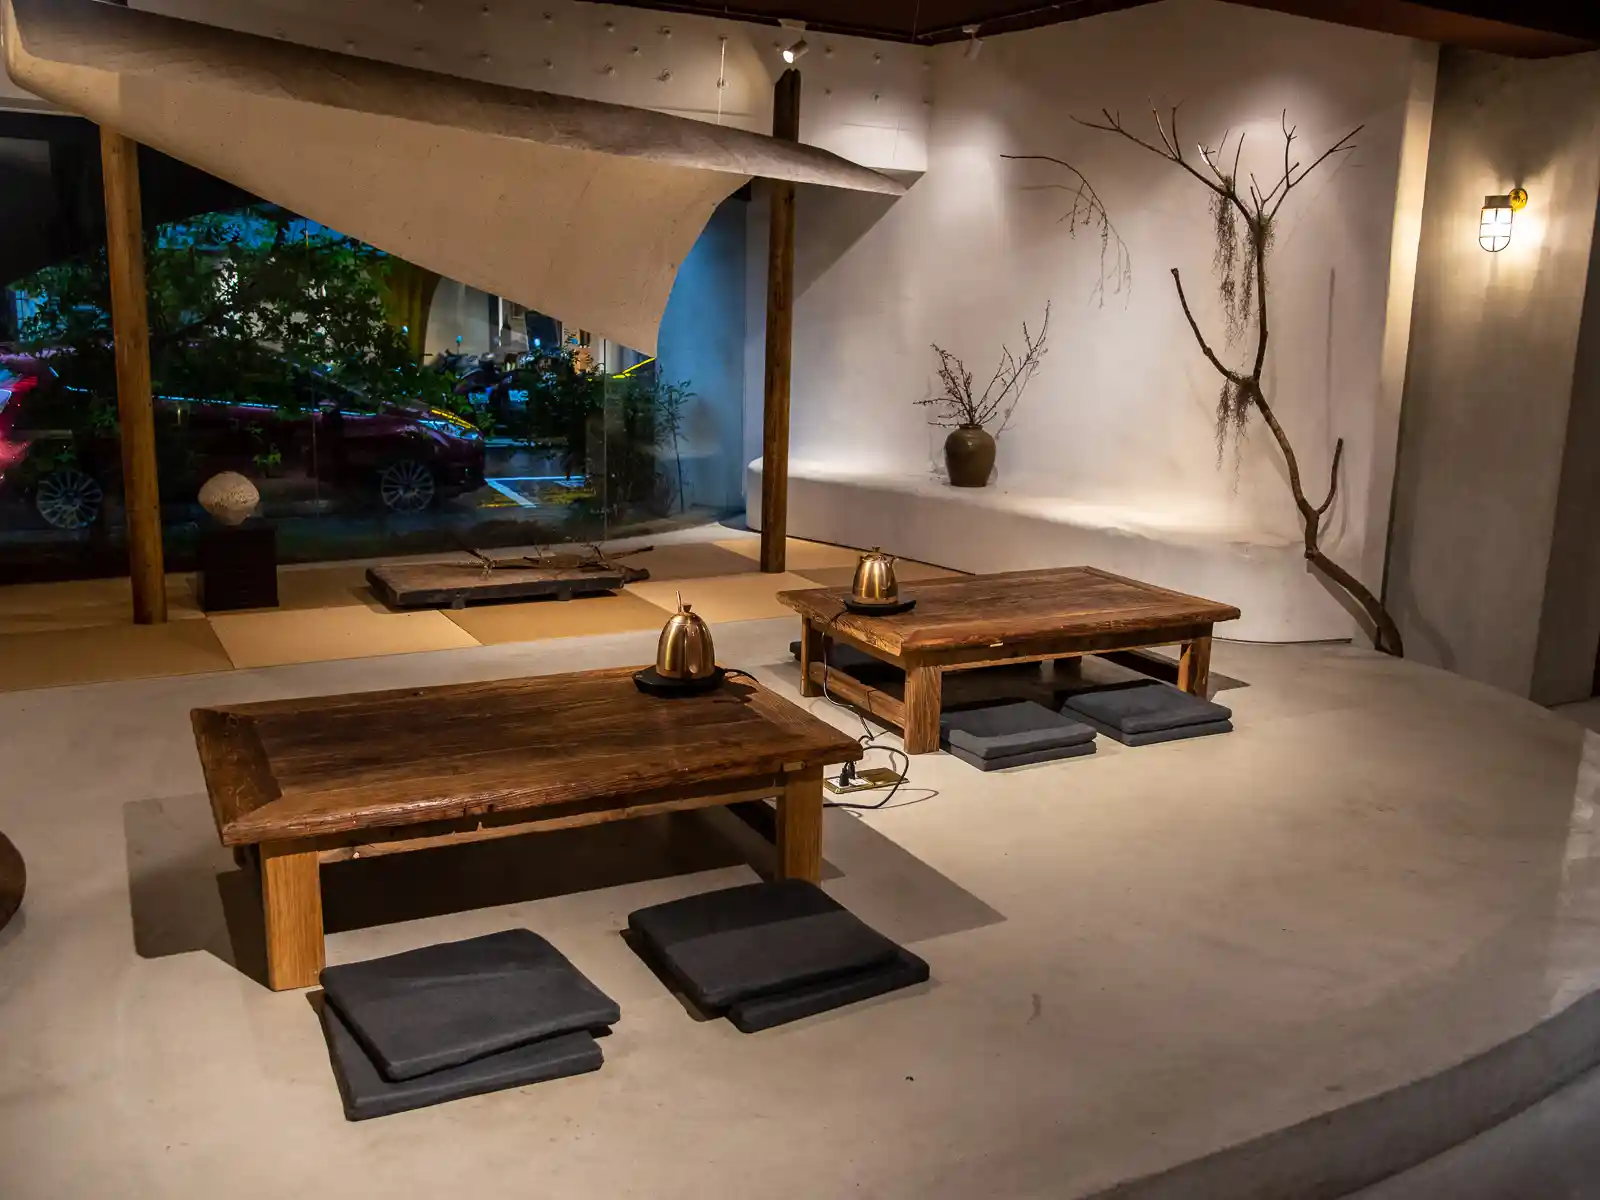 Wooden tables and cushions as well as installation art at Hermit's Hut tatami-seating area.